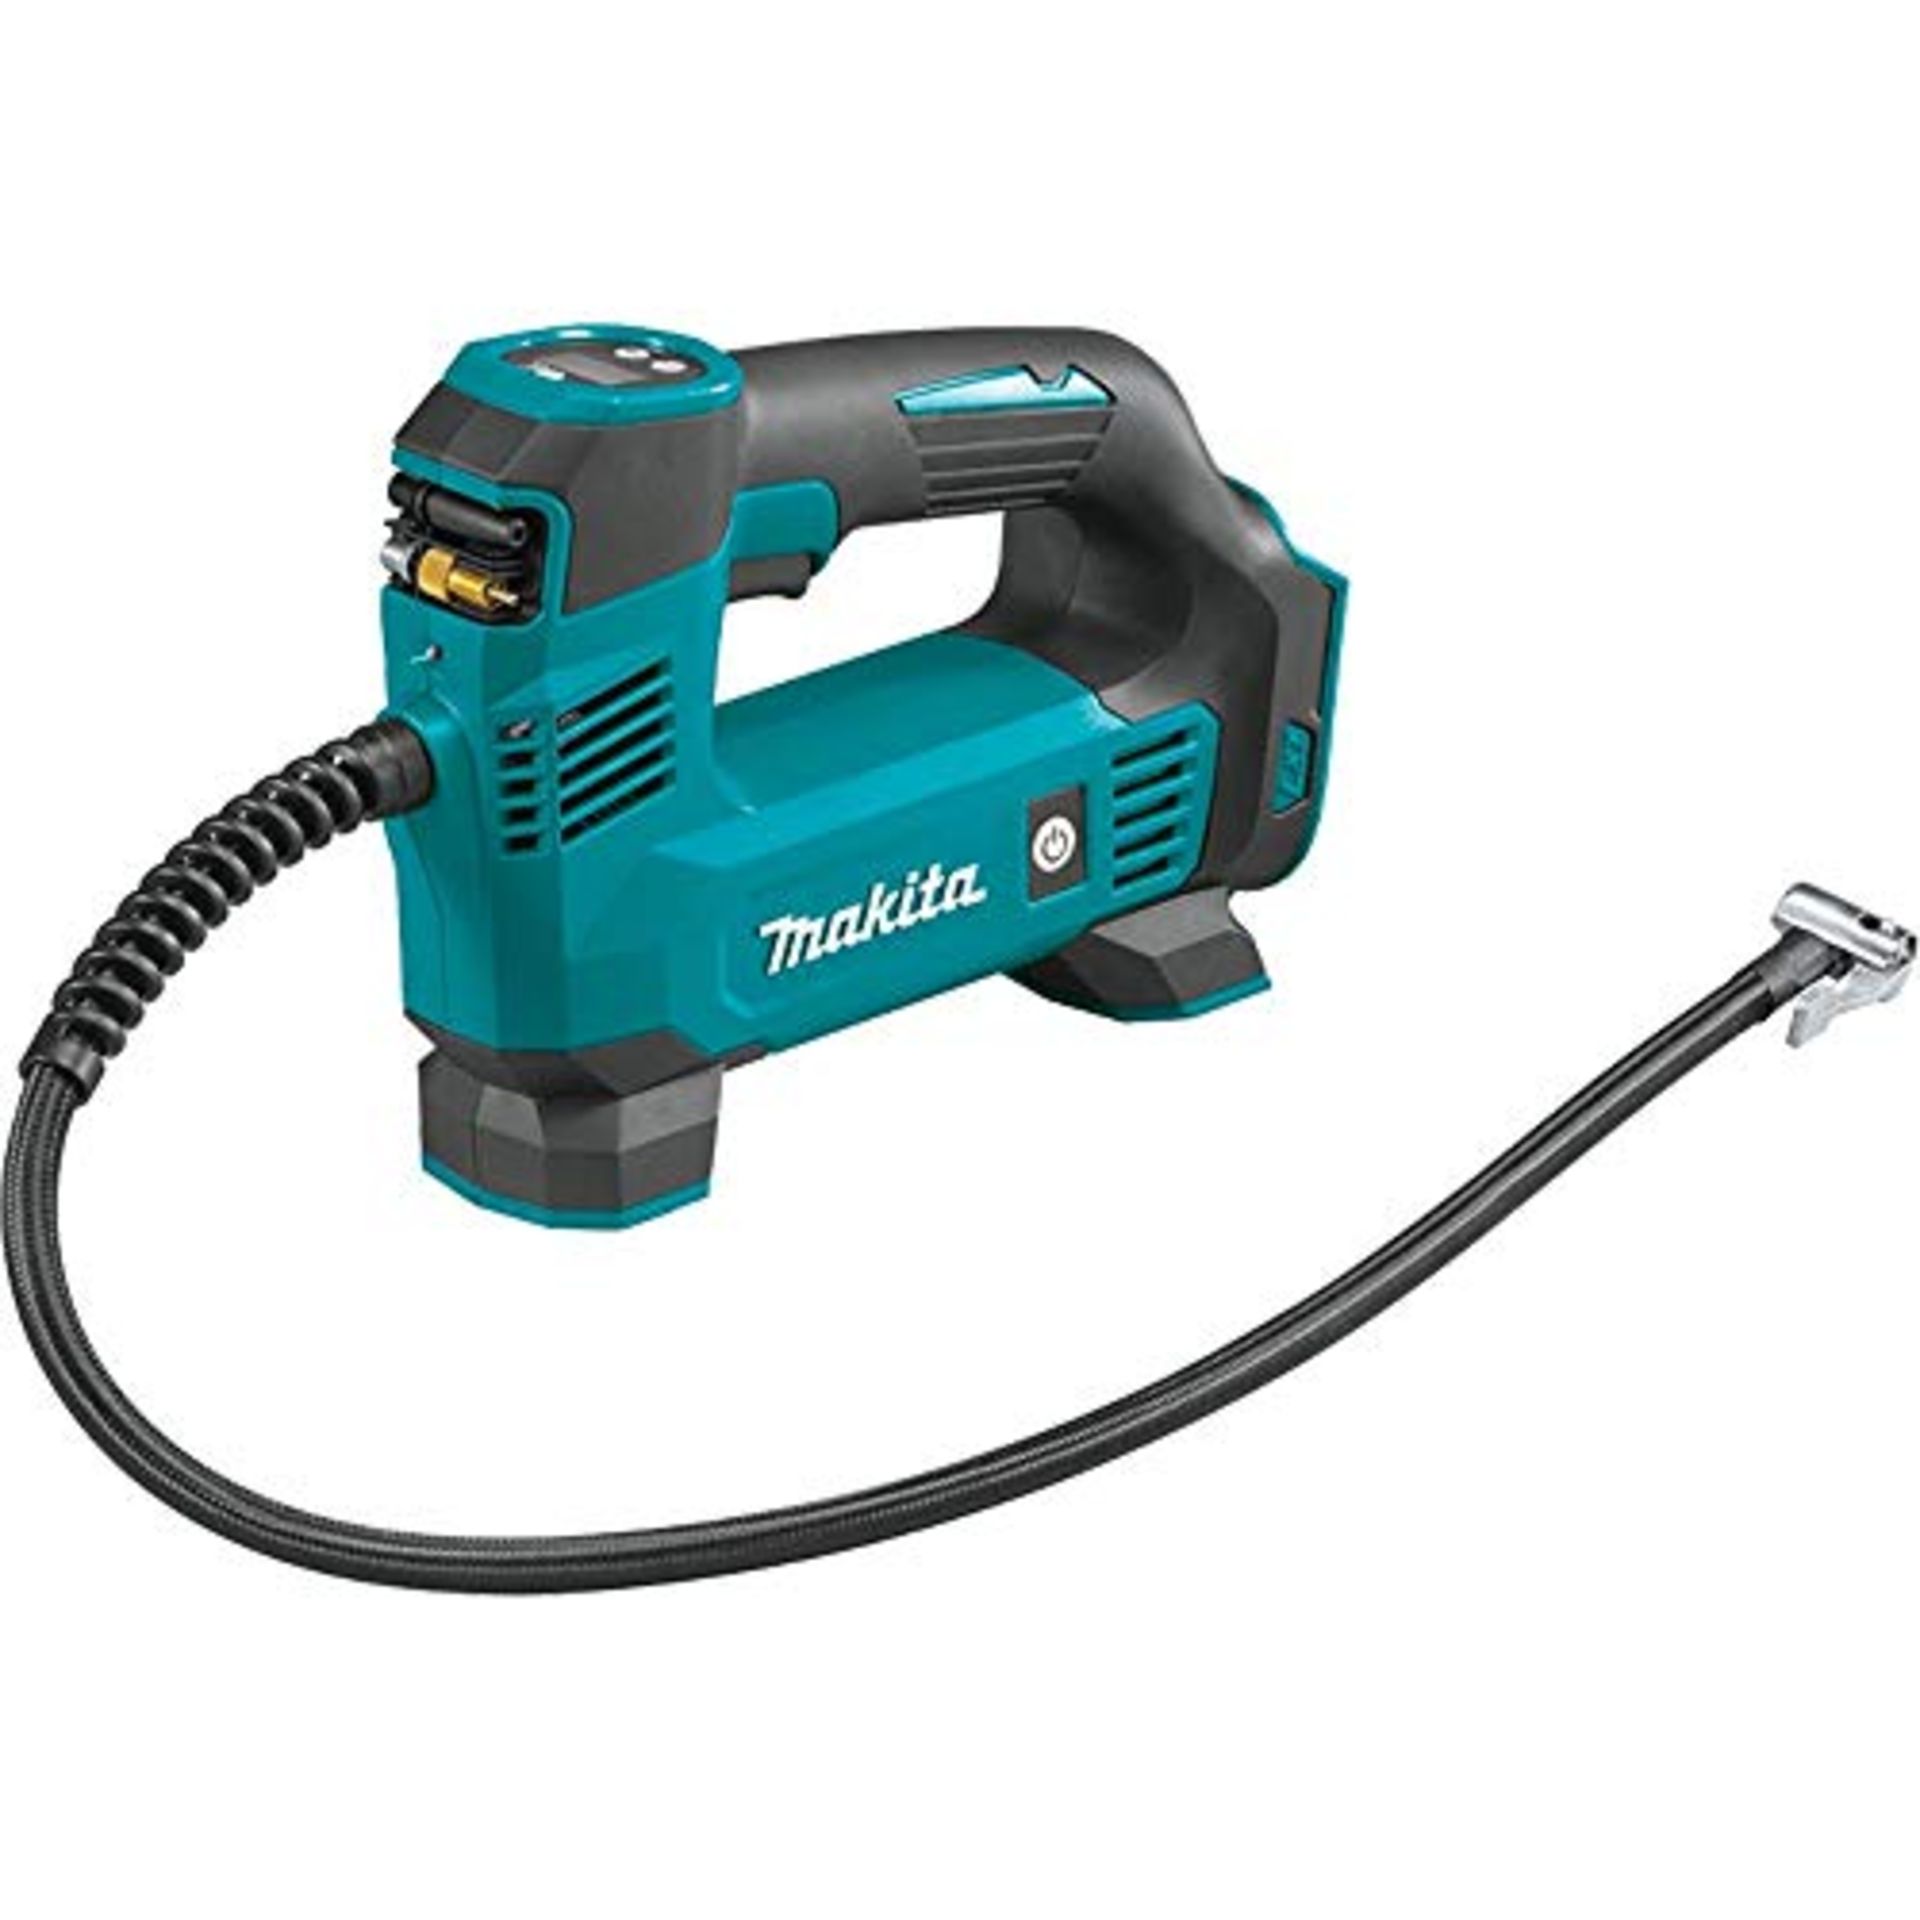 Makita DMP180Z 18V Li-ion LXT Inflator - Batteries and Charger Not Included, Blue/Silv - Image 9 of 10